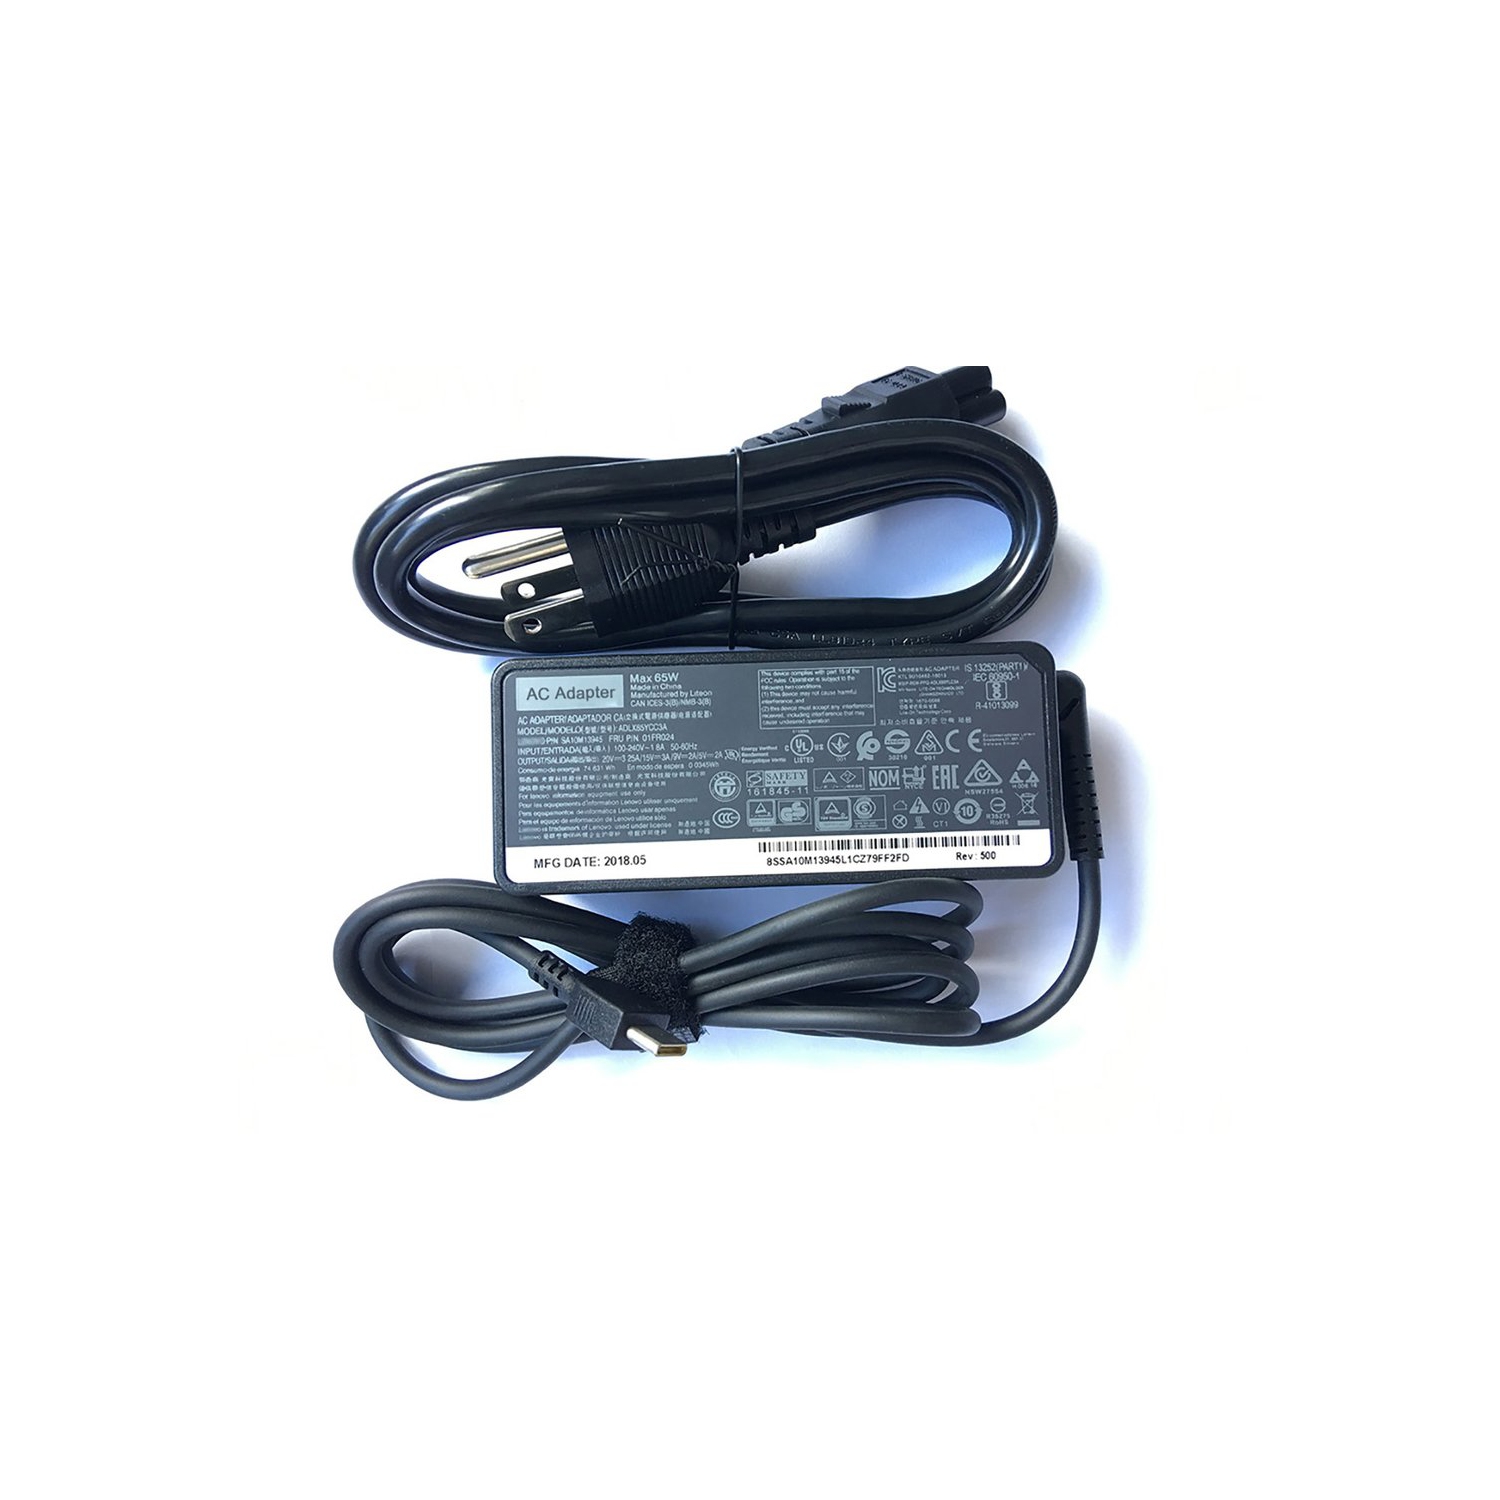 New Genuine Lenovo ac adapter charger 65W Type-C with power cord. Voltage: 5V/9V/12V/15V/20V; Current: 2A/3A/3.25; Connector: USB-C TYPE-C